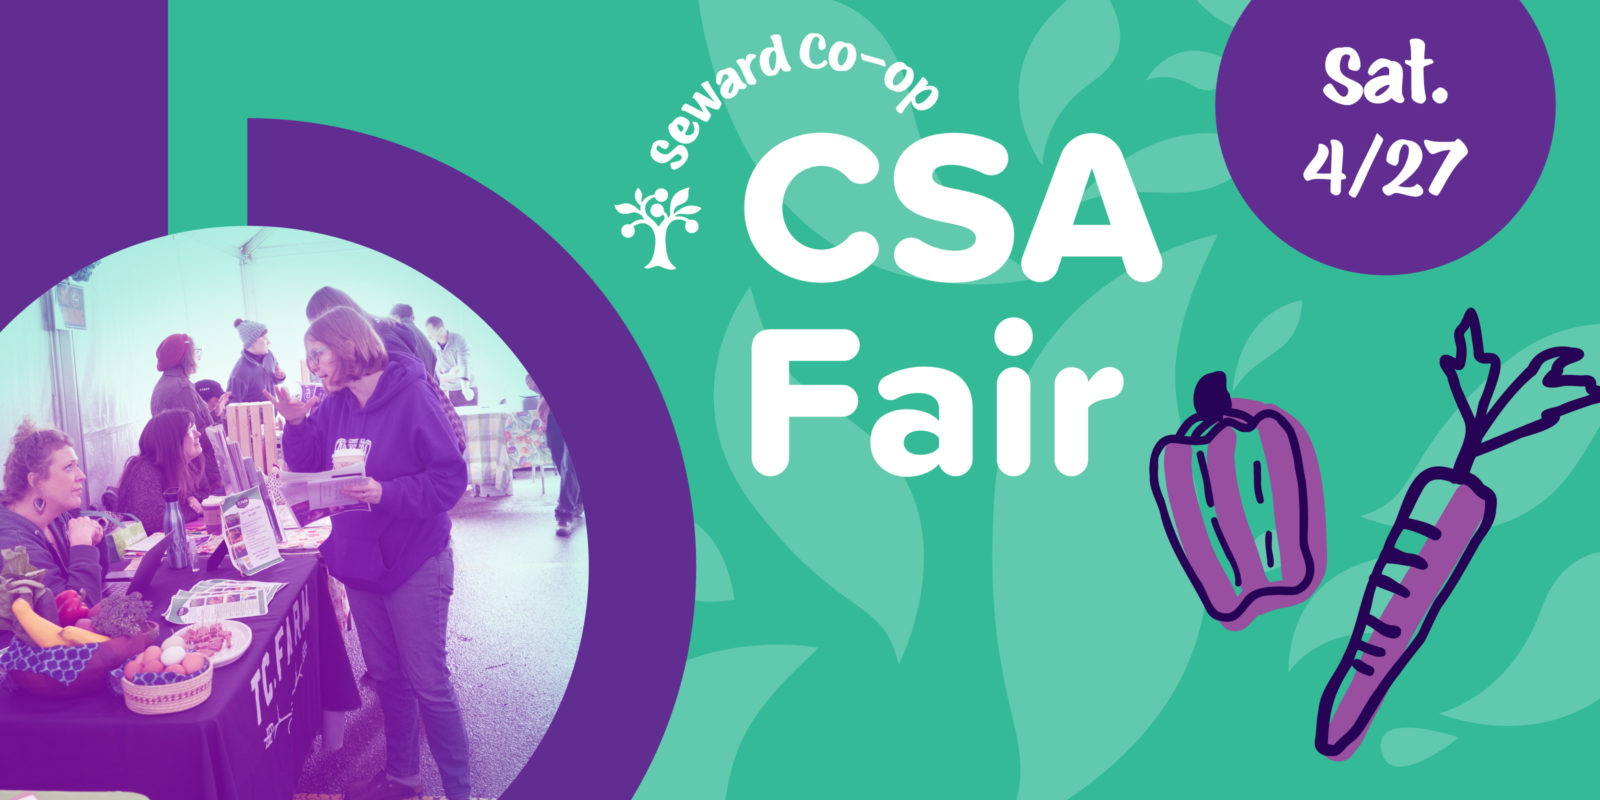 A graphic for the CSA Fair on April 27